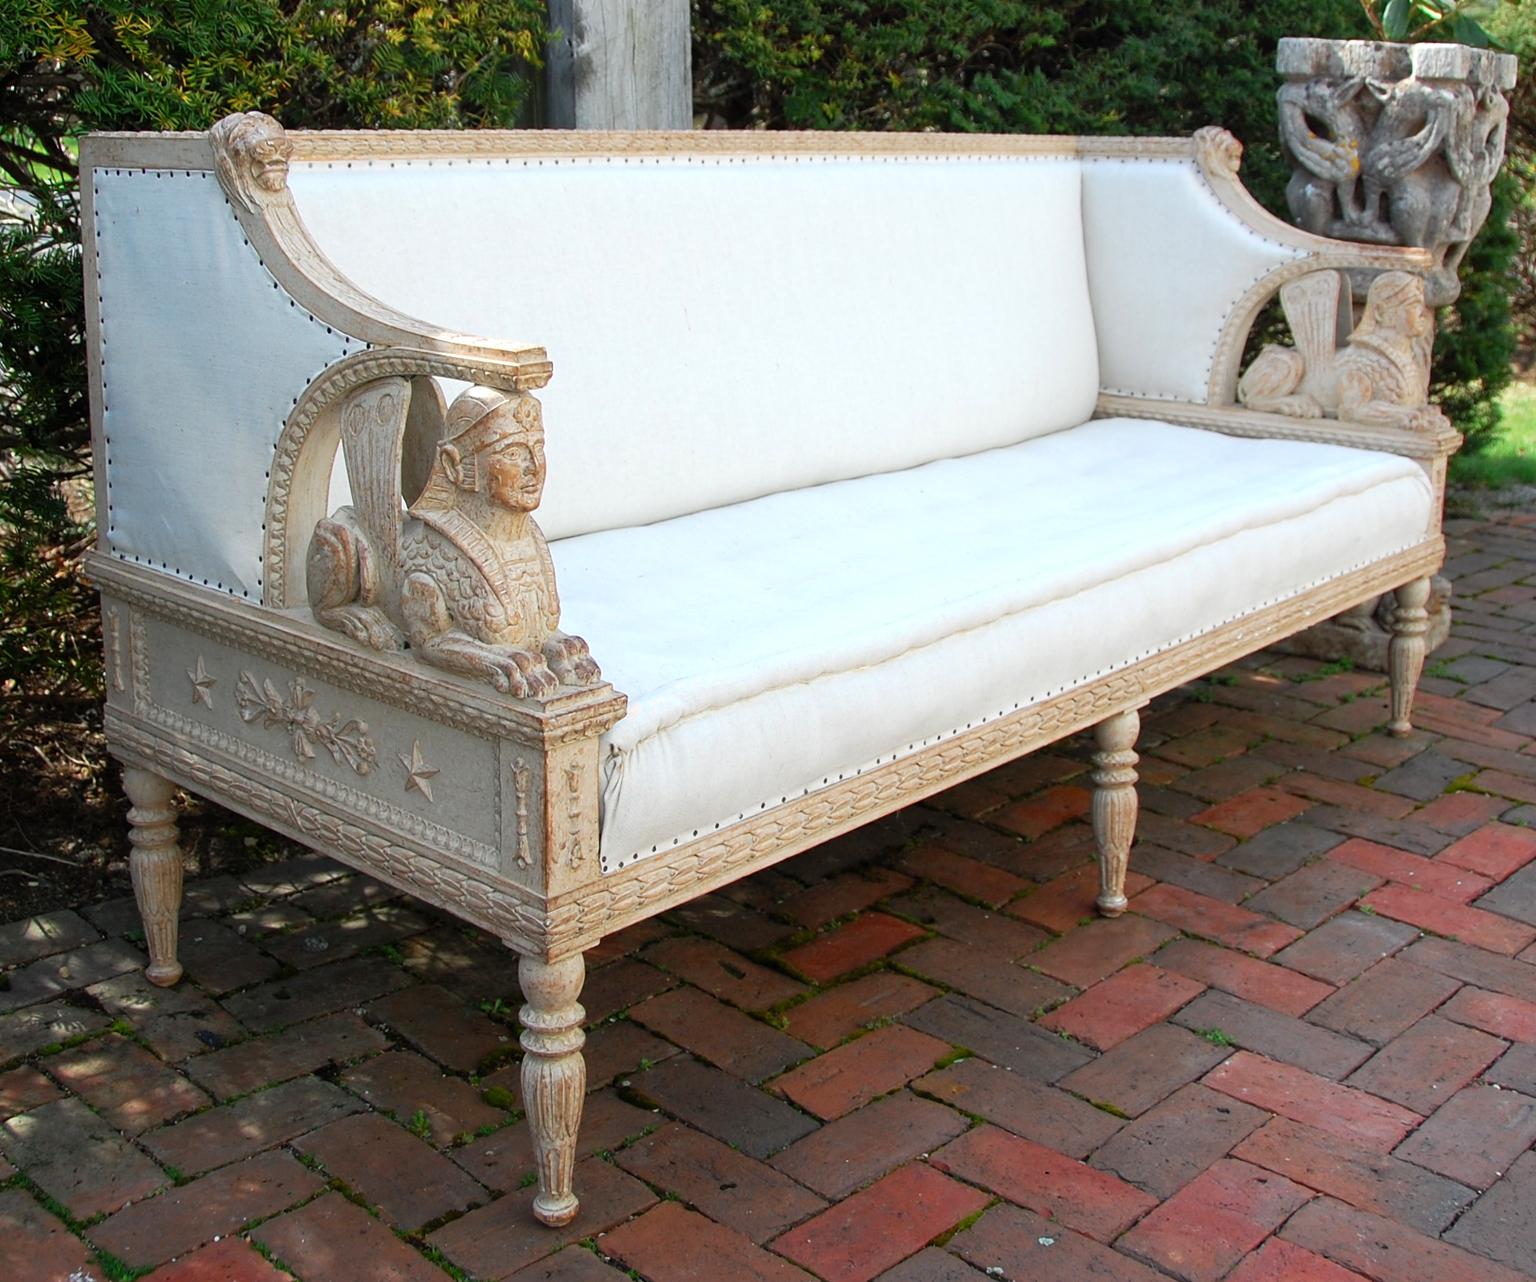 Swedish Gustavian style mid-19th century carved beechwood sofa. This rarity has full bodied hand carved sphinx arms. The whole frame is deeply carved with lion heads to accent the leaf-carved top rail, and extensive carving on most beech surfaces.